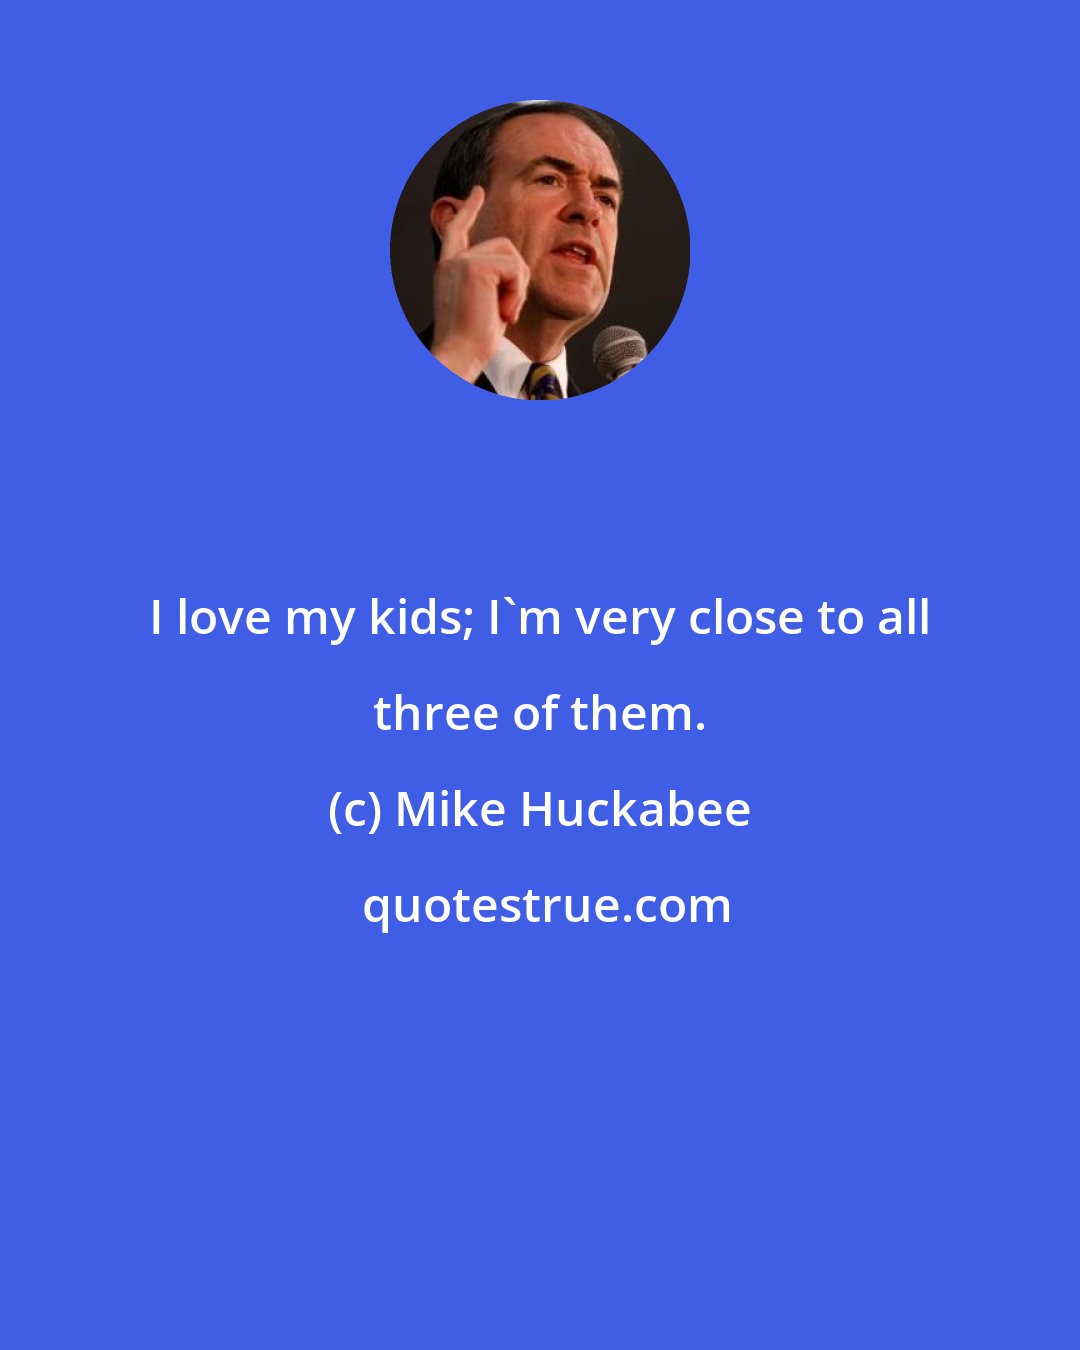 Mike Huckabee: I love my kids; I'm very close to all three of them.